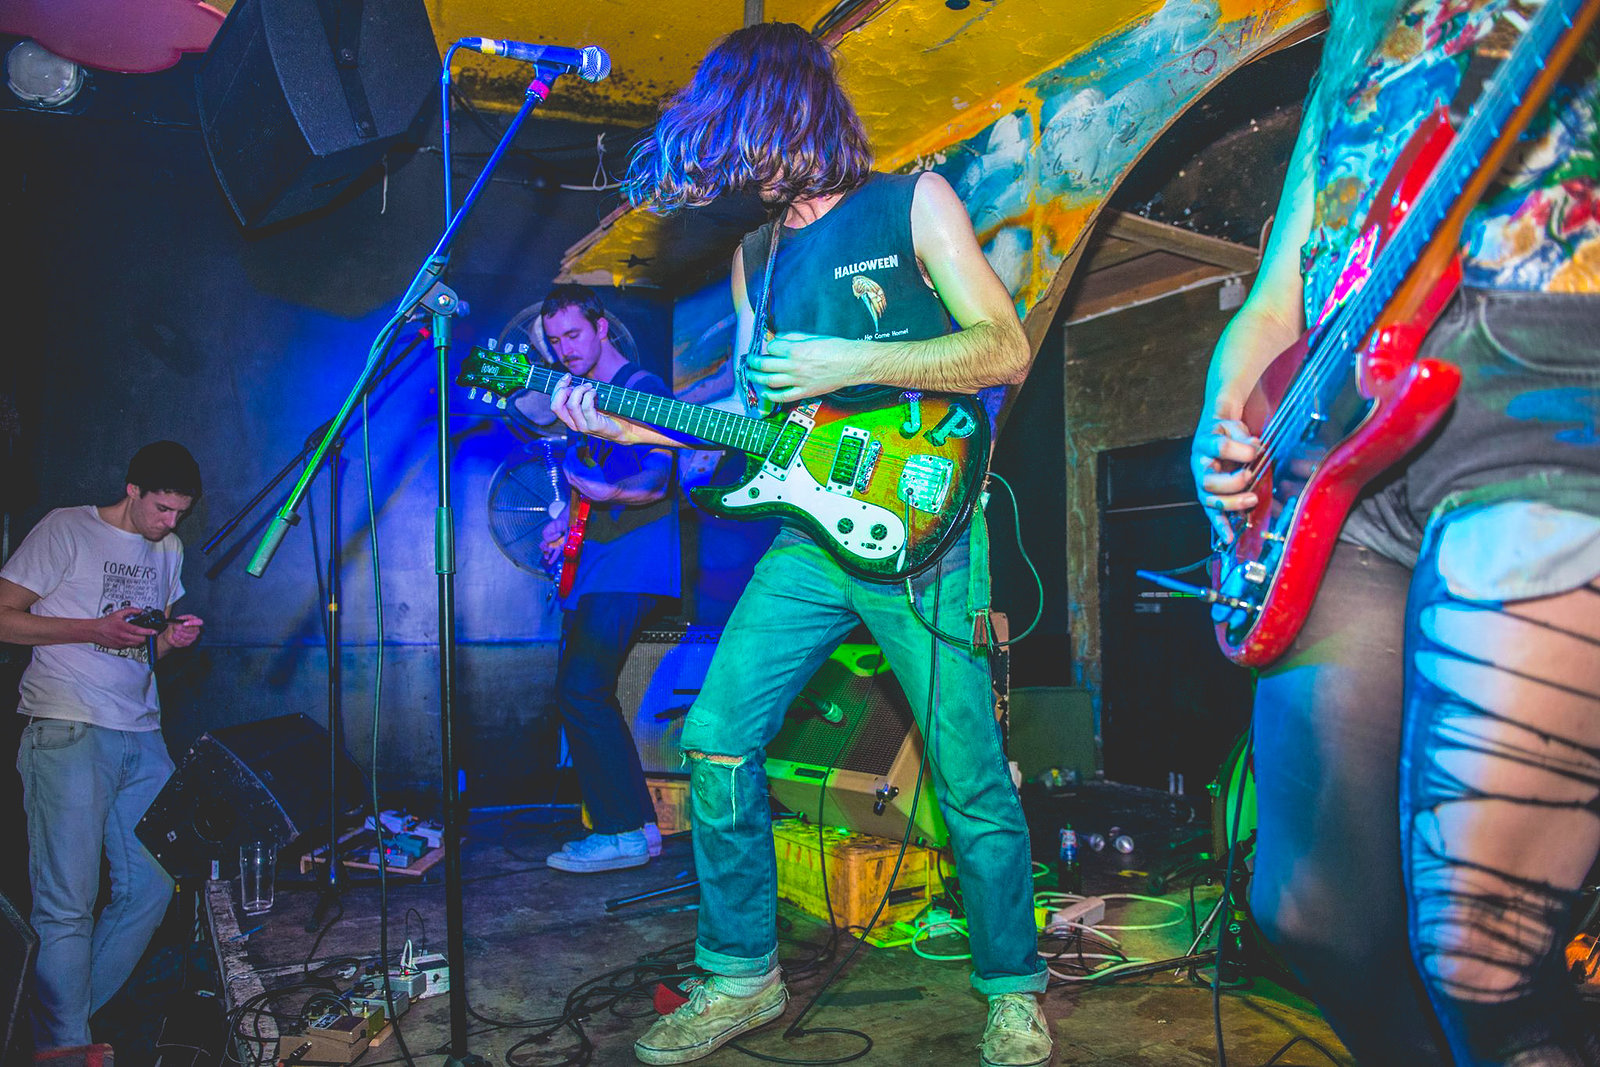 Guantanamo Baywatch at The Shacklewell Arms, December 2015